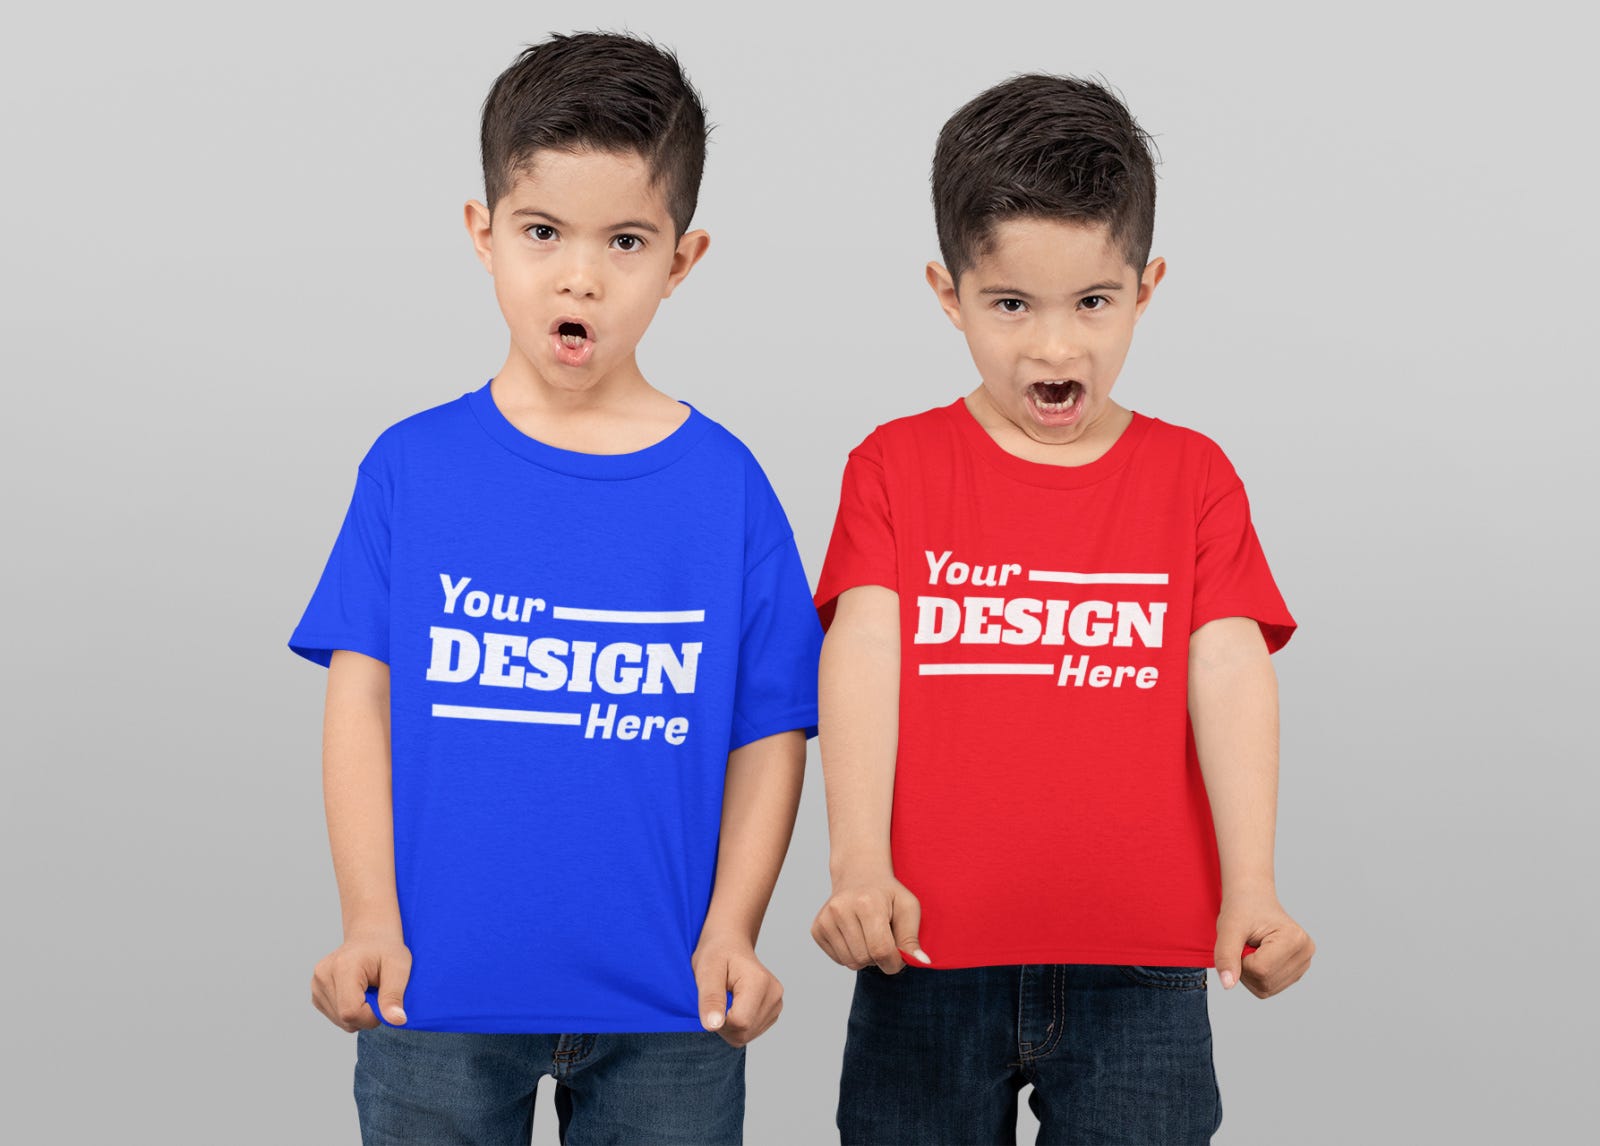 At TeeShirtPalace, we offer a wide range of high-quality kids and baby custom apparel that can be personalized to your exact specifications. Our collection includes comfortable t-shirts, stylish hoodies and sweatshirts, onesies, and a variety of other garments that are perfect for any occasion. Whether you're looking for a fun outfit for a family gathering or something special for your child's birthday, we have a variety of styles and colors to choose from. Our custom t-shirts for kids come in a variety of sizes and styles, from classic tees to trendy raglan sleeves. Our baby onesies are available in short or long sleeves and make great gifts for new parents. With our easy-to-use design tool, you can create a unique look that showcases your child's personality. Whether you're looking for custom apparel for your own kids or as a gift, TeeShirtPalace has you covered.